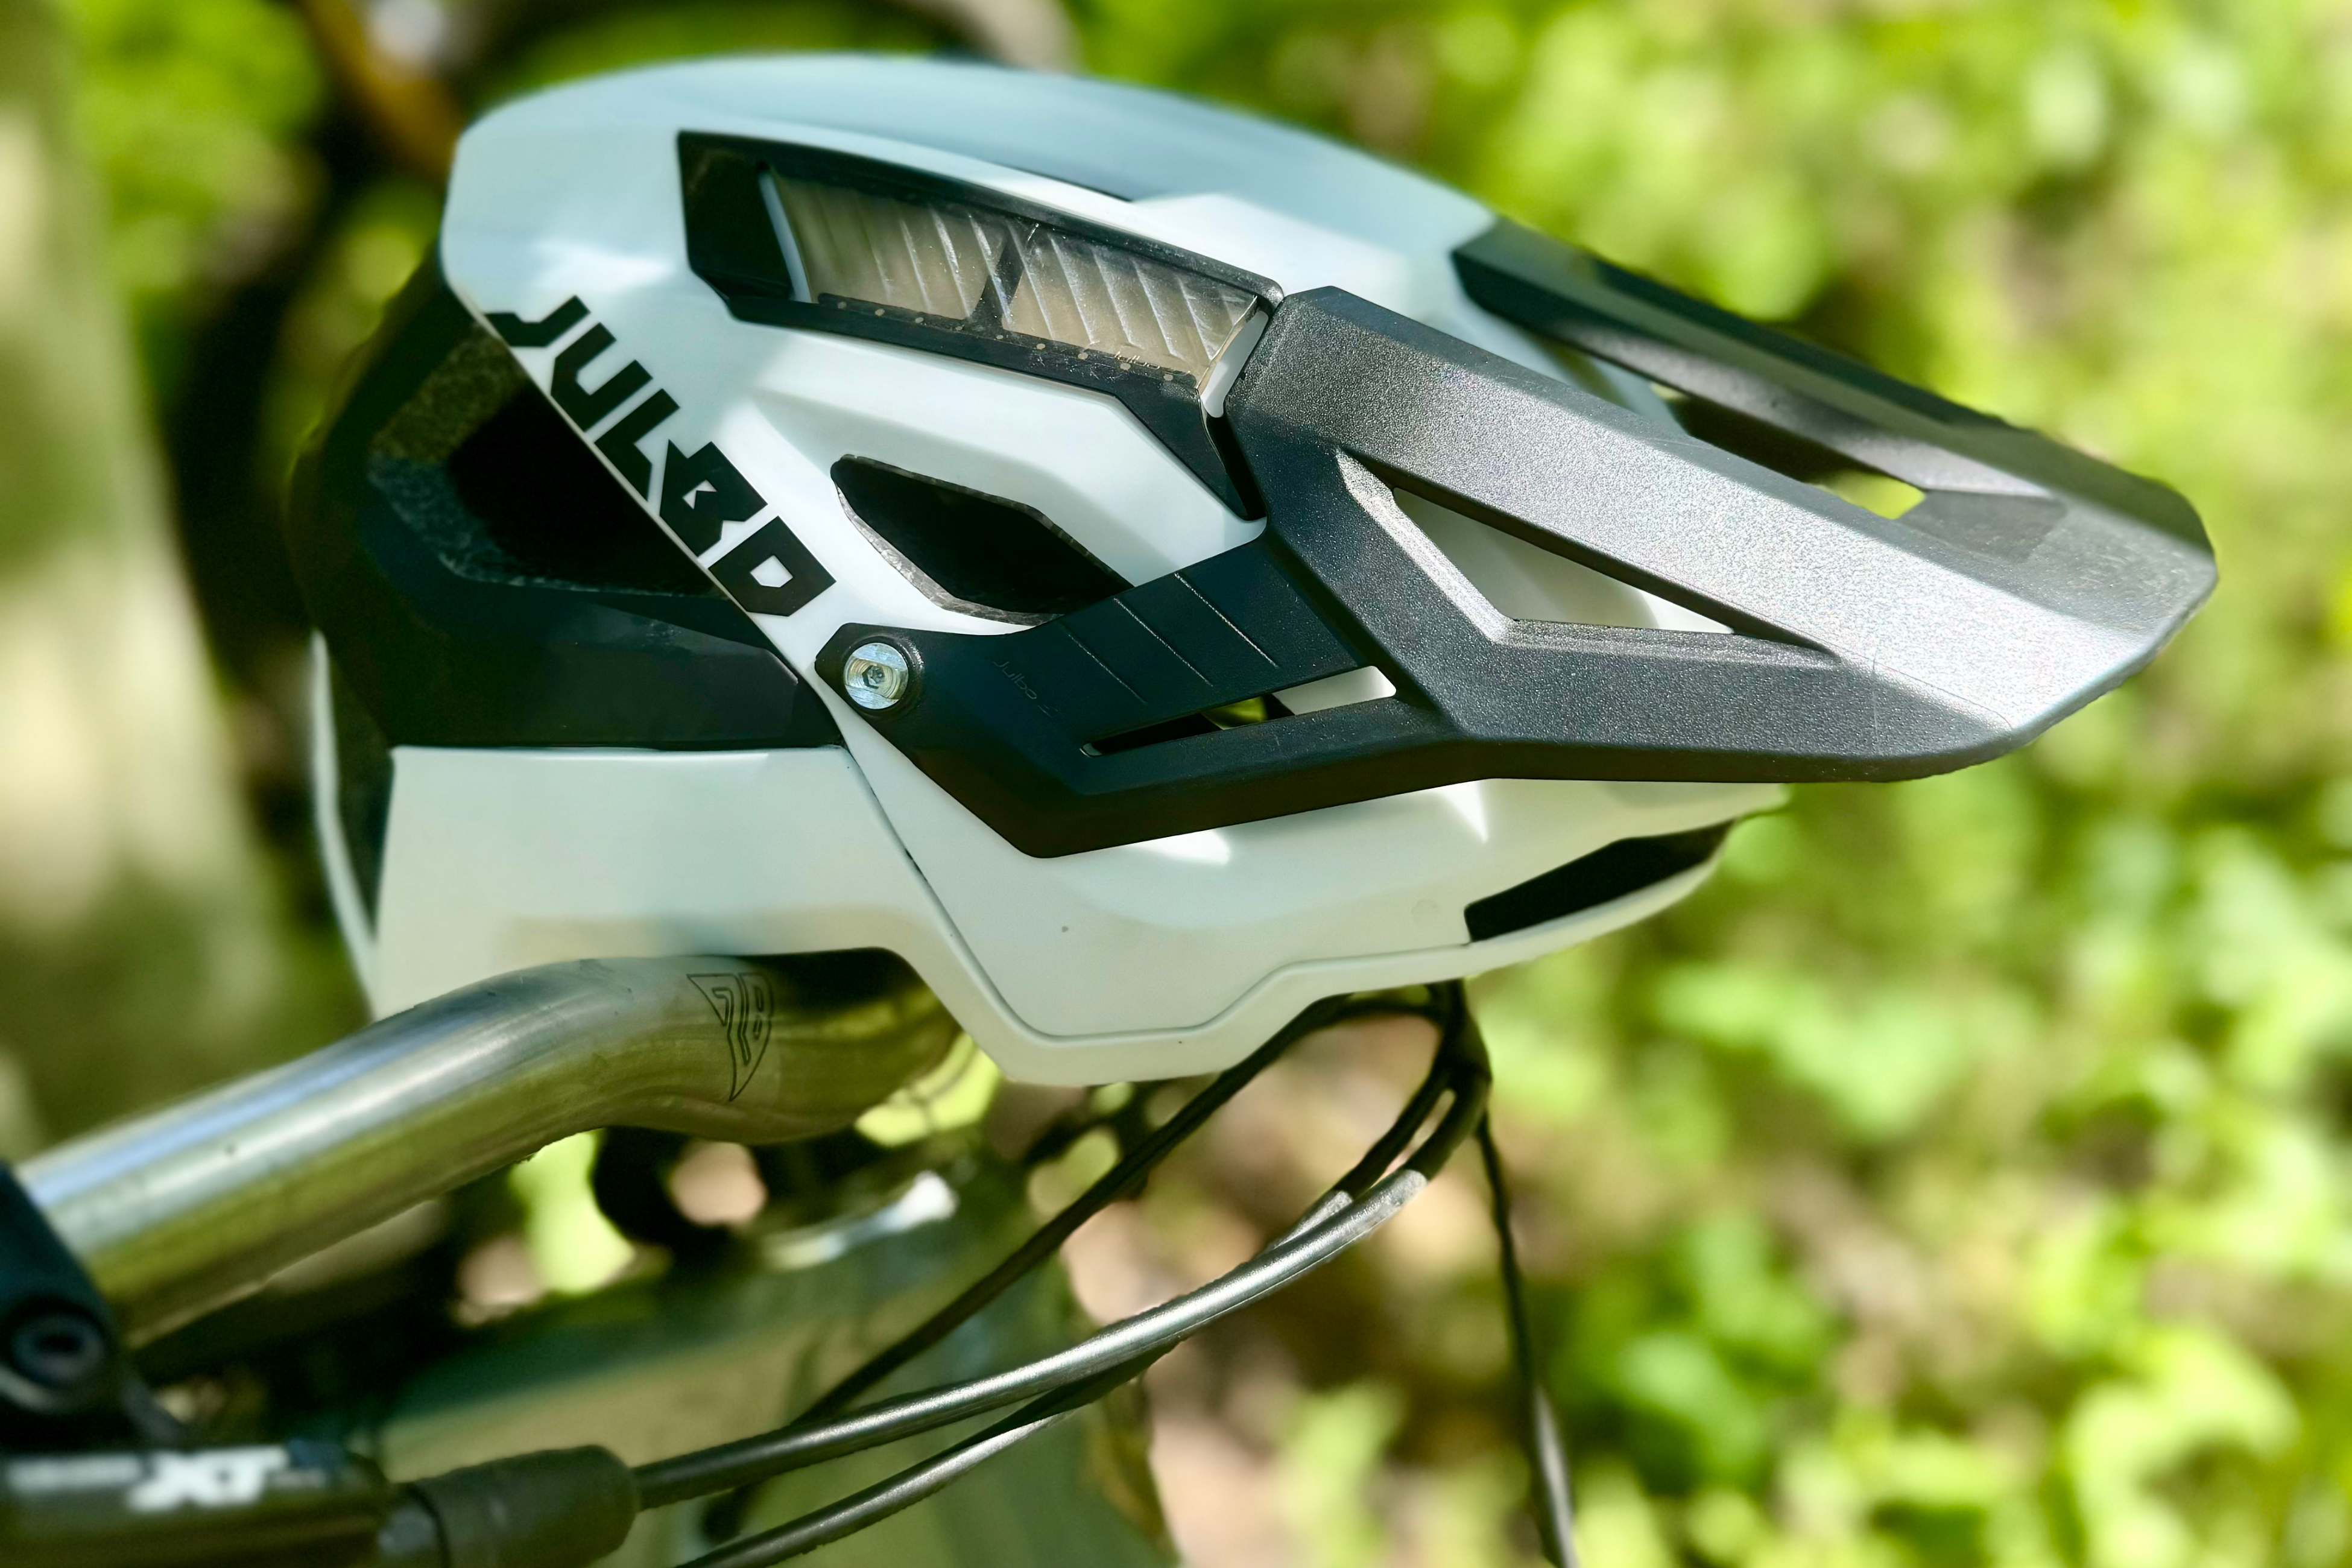 Tested & Reviewed: The Forest Evo's Innovative Details